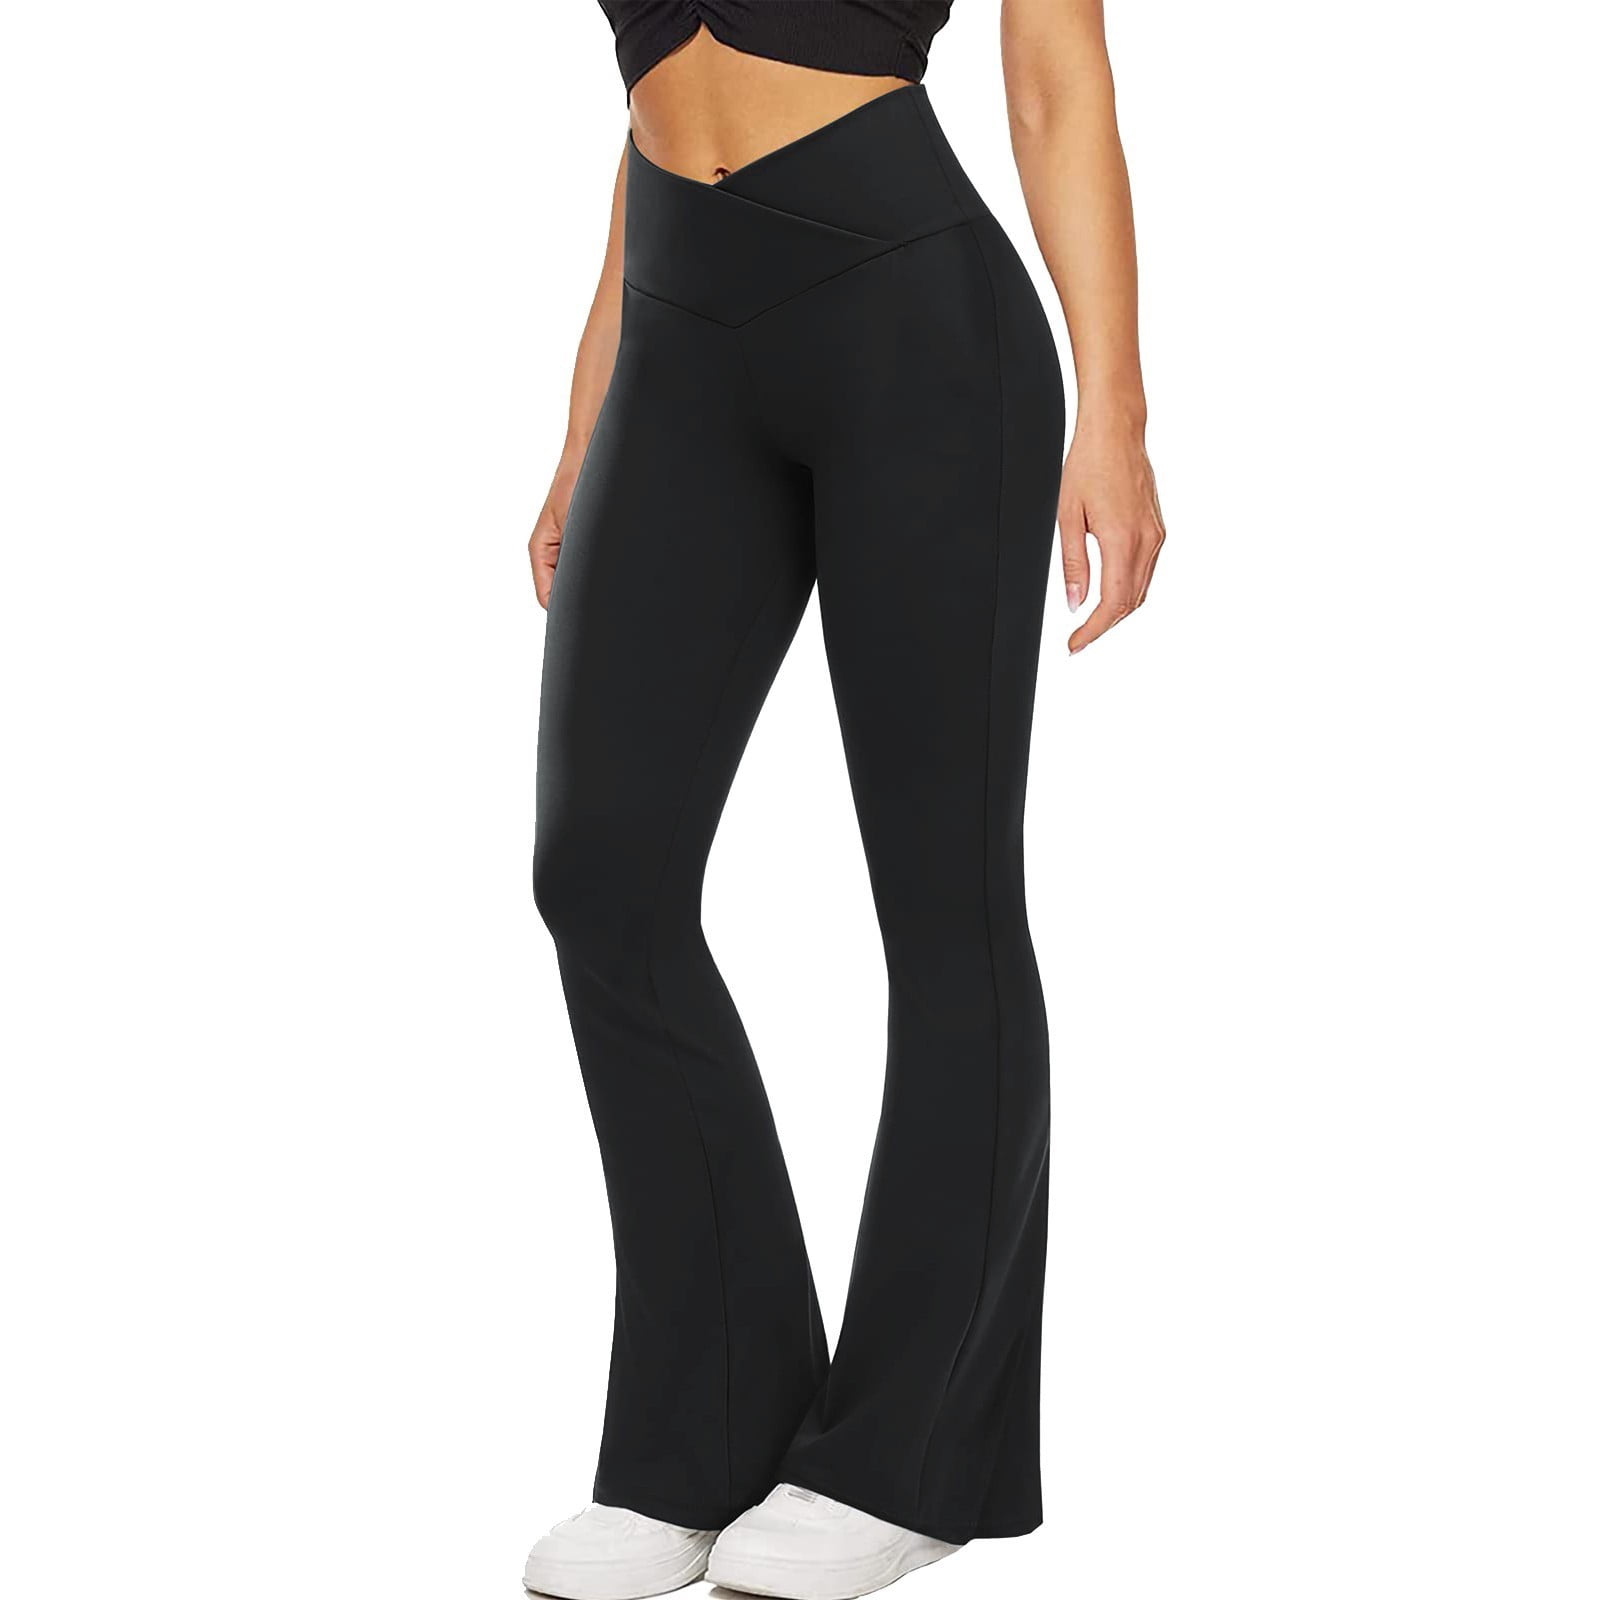 Buy the Sunzel Flare Black Leggings With Tummy Control Crossover Waist